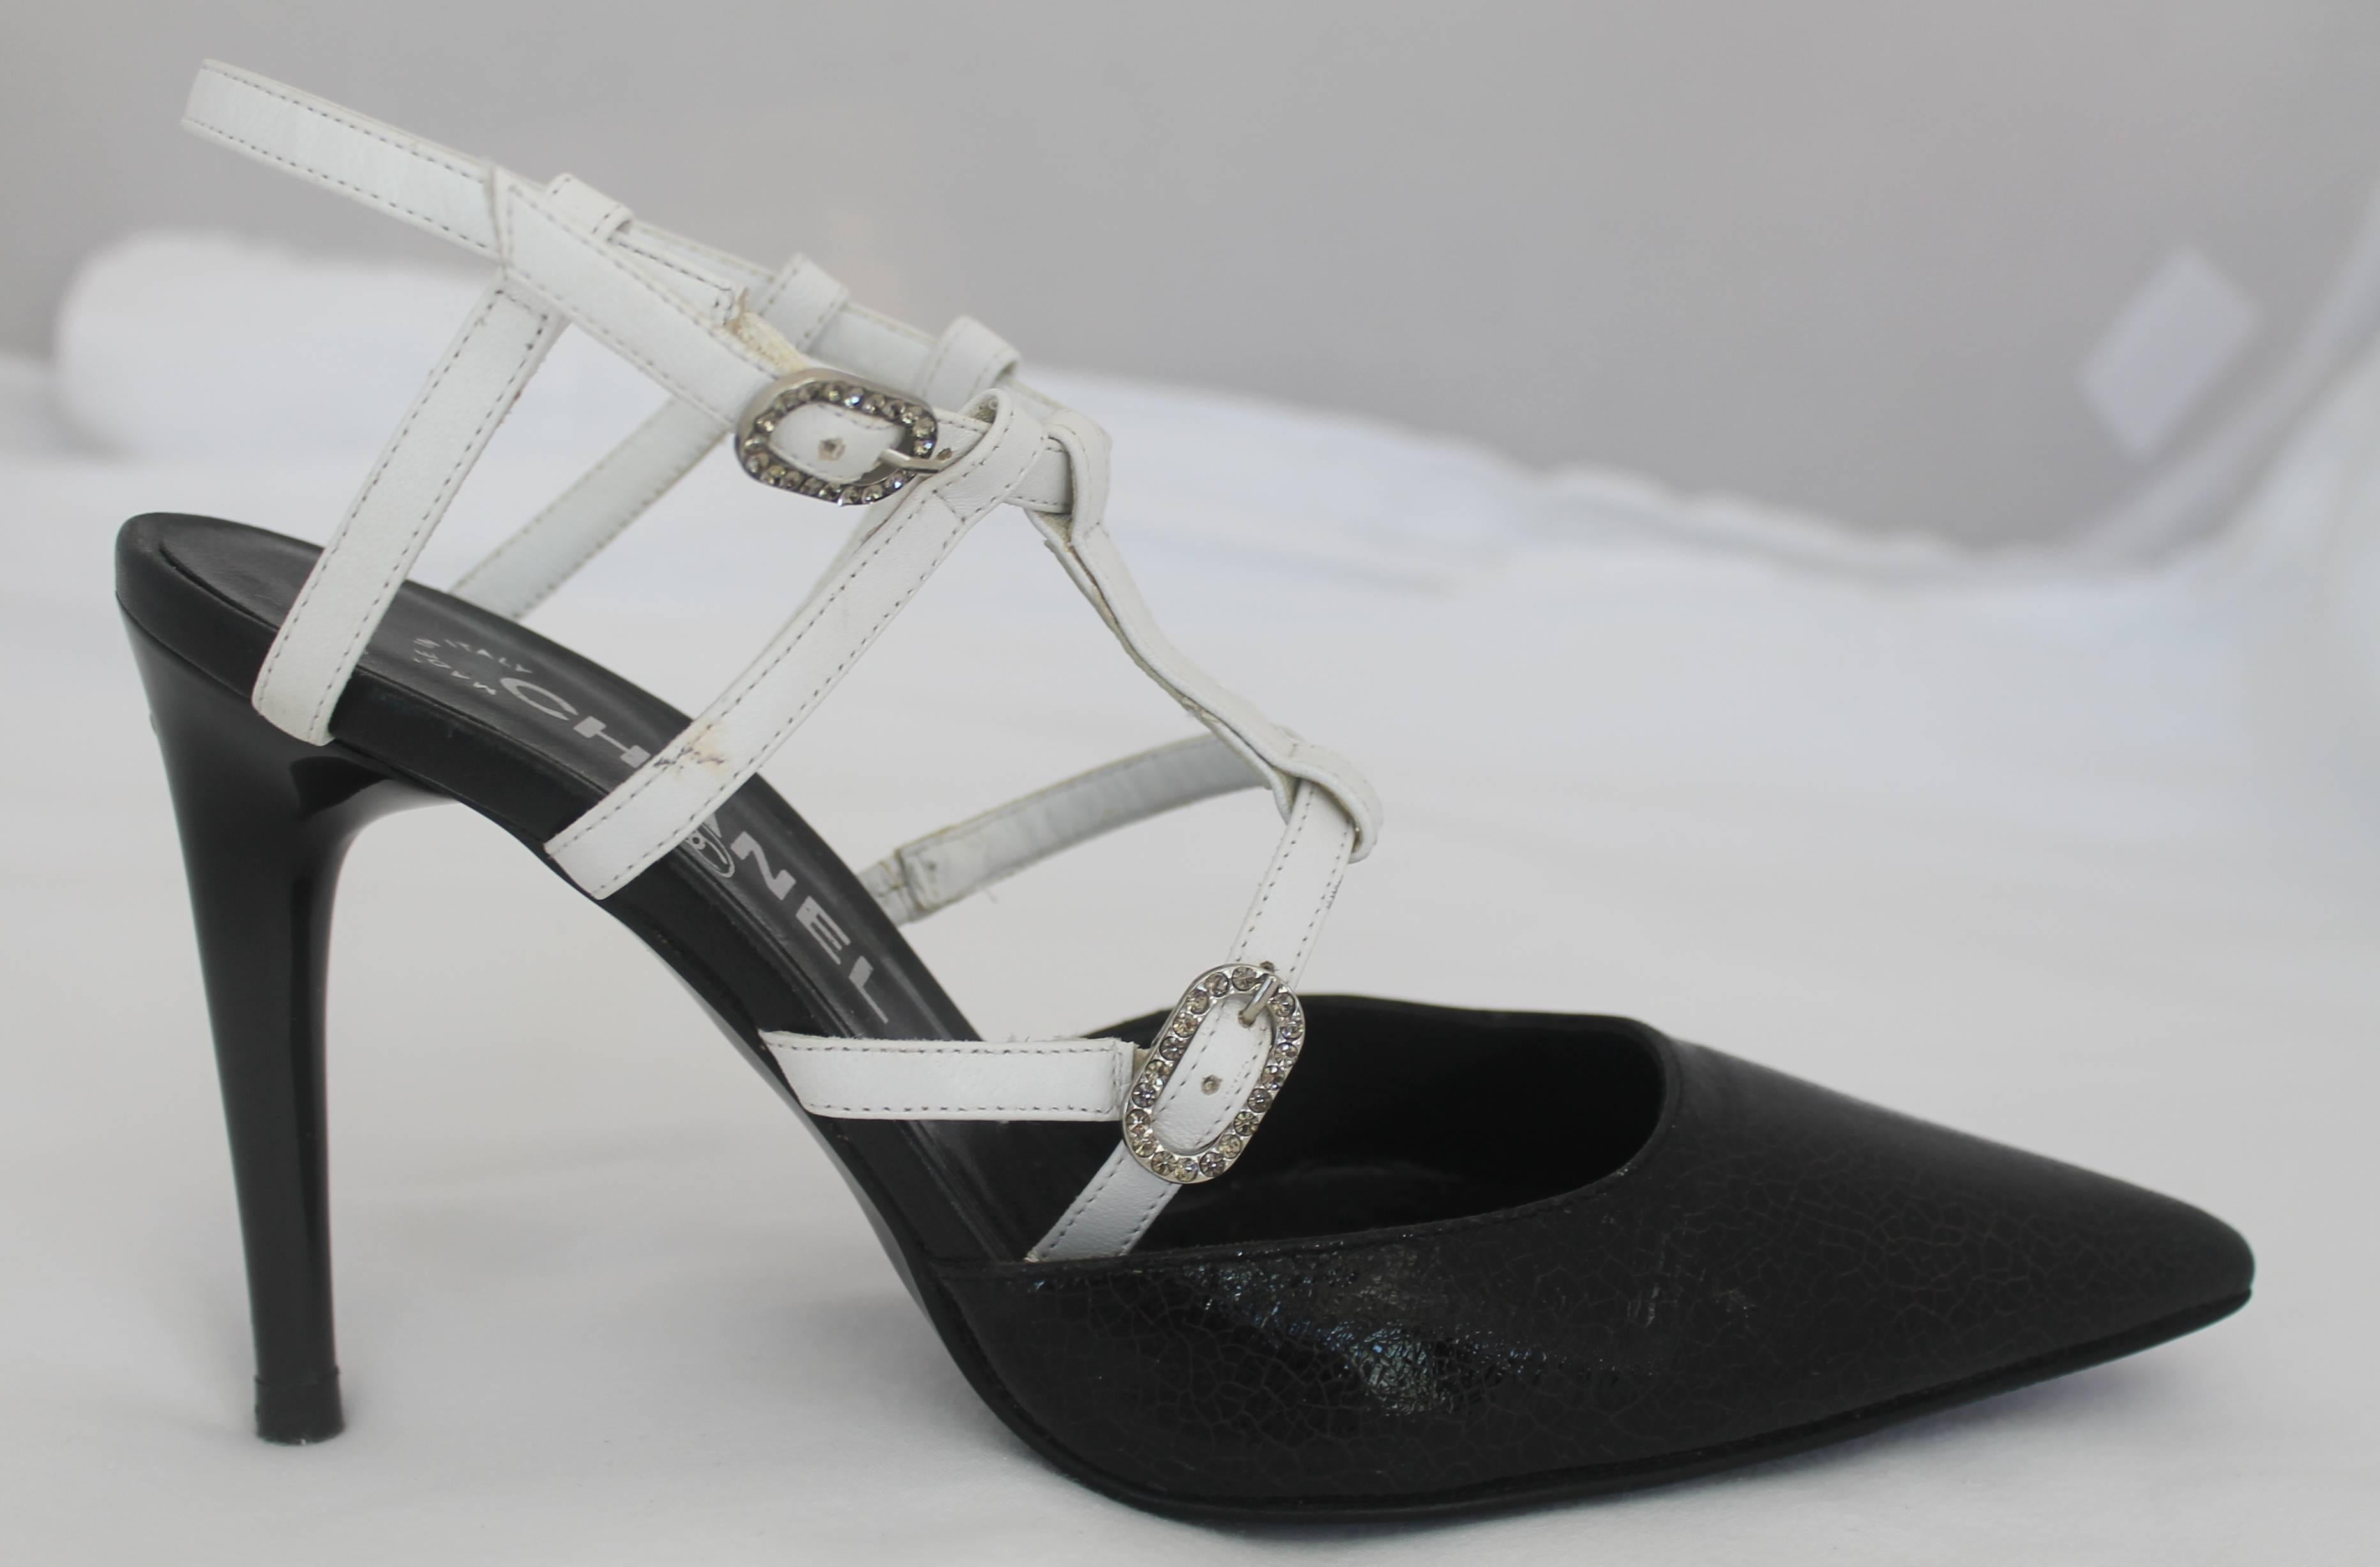 Chanel Black and White Cracked Patent Leather Pointed-Toe Heels - 35.5. These gorgeous heels are black cracked patent leather with white straps. Each shoe has two rhinestone buckles. At the top of each heel there is a silver metal Chanel logo. They